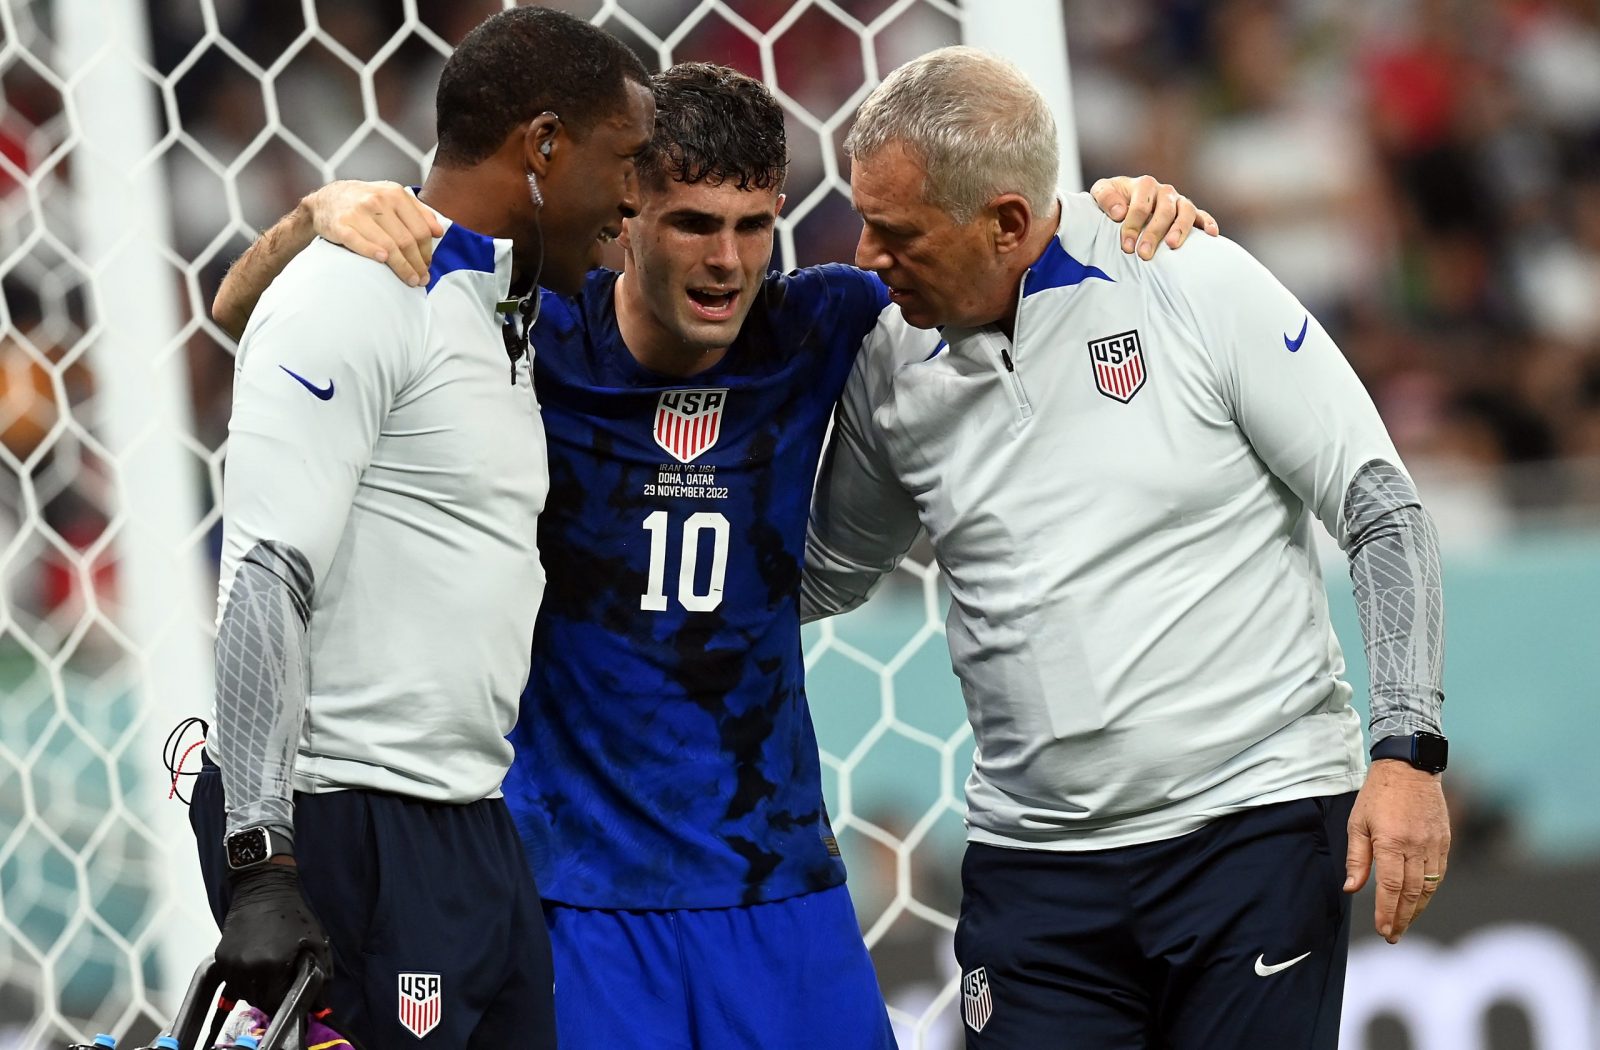 epa10337196 Christian Pulisic of the USA (C) gets assistance after colliding with goalkeeper Alireza Beiranvand of Iran as he scored the 1-0 during the FIFA World Cup 2022 group B soccer match between Iran and the USA at Al Thumama Stadium in Doha, Qatar, 29 November 2022.  EPA/Neil Hall